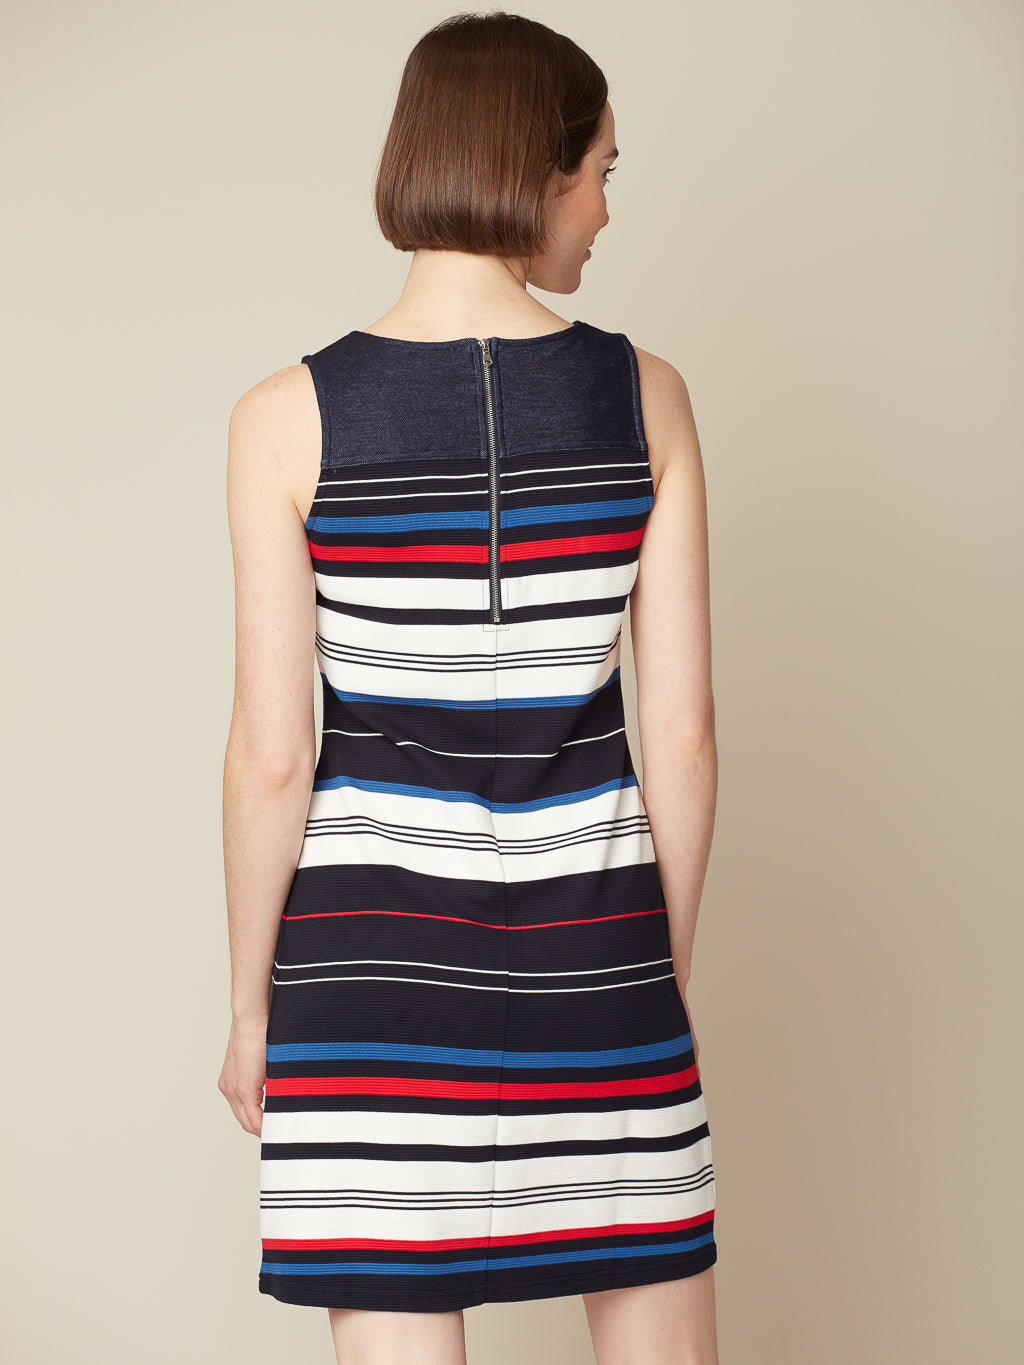 Sleeveless dress with zip at back